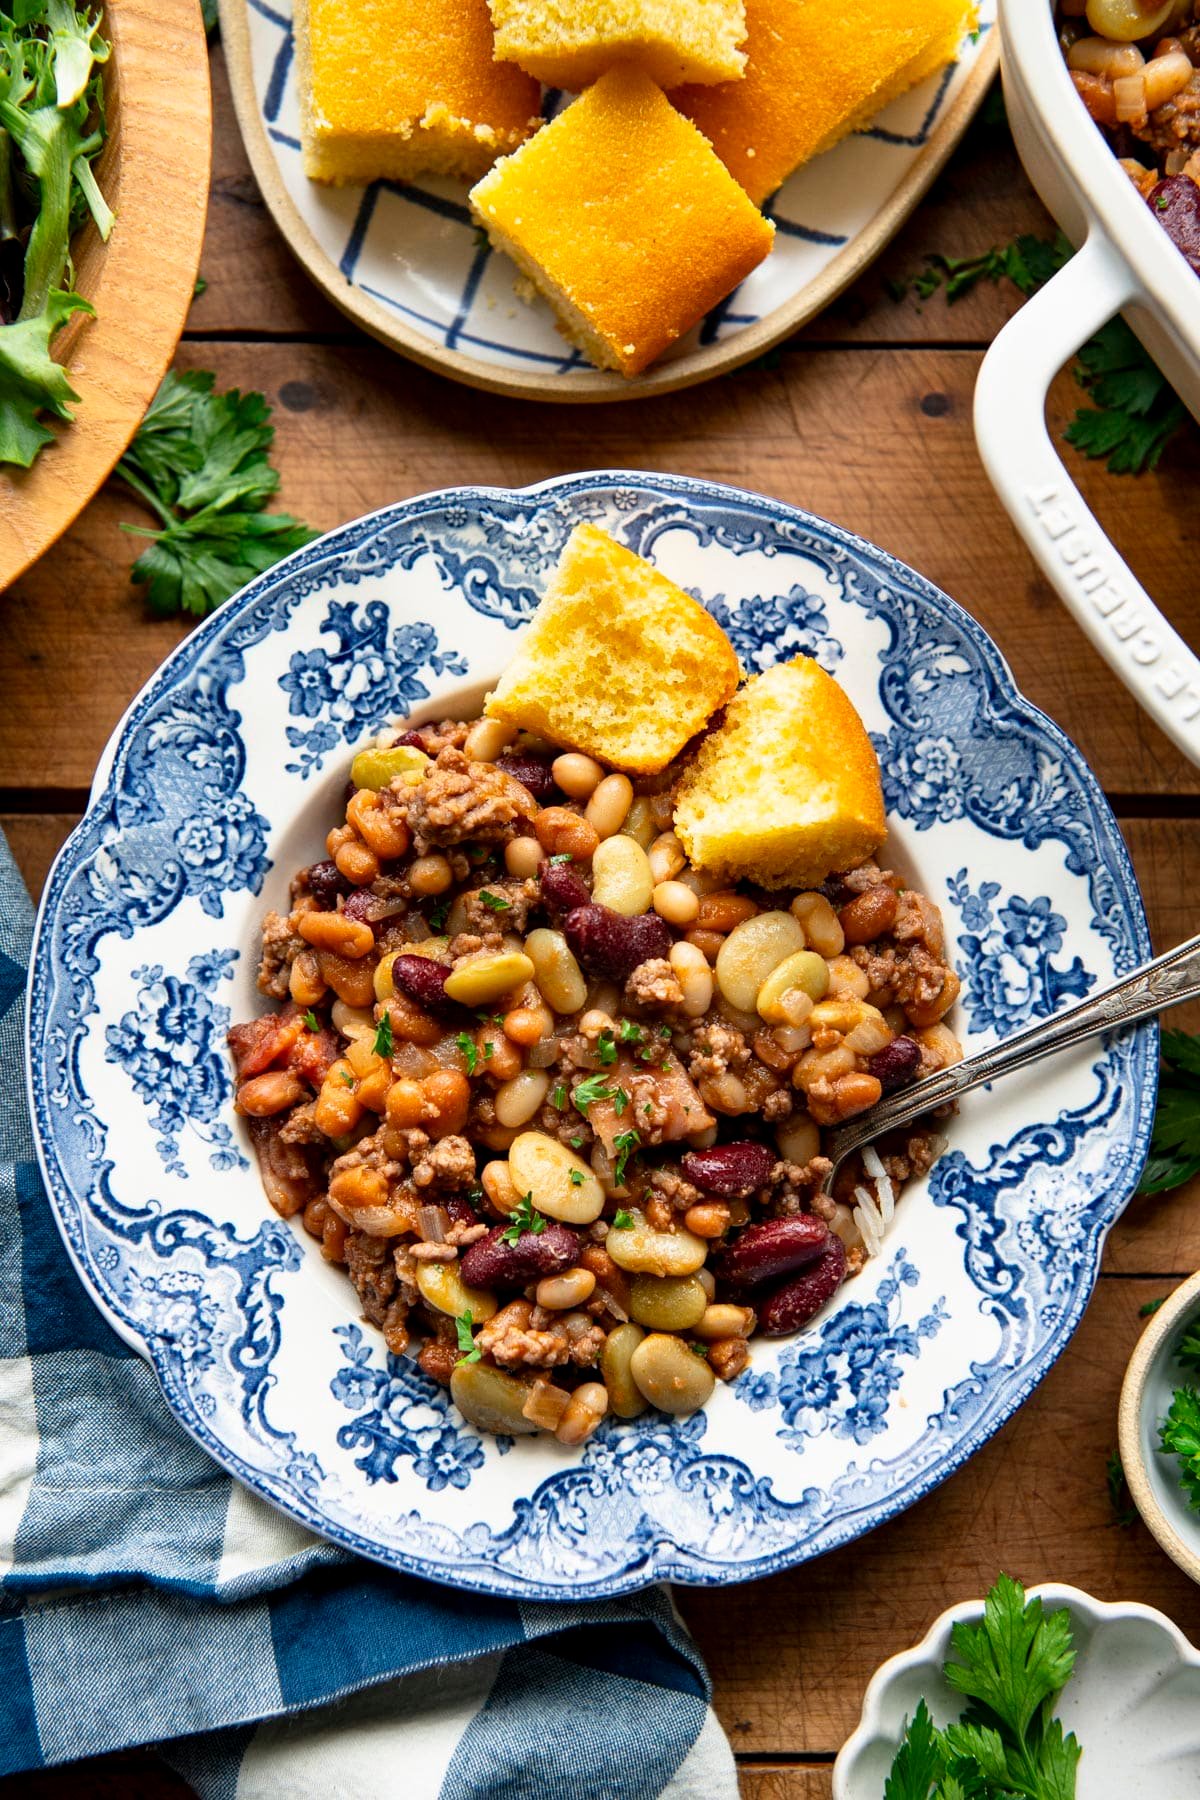 Overhead image of grandma's calico beans recipe on a wooden table with a side salad and cornbread.